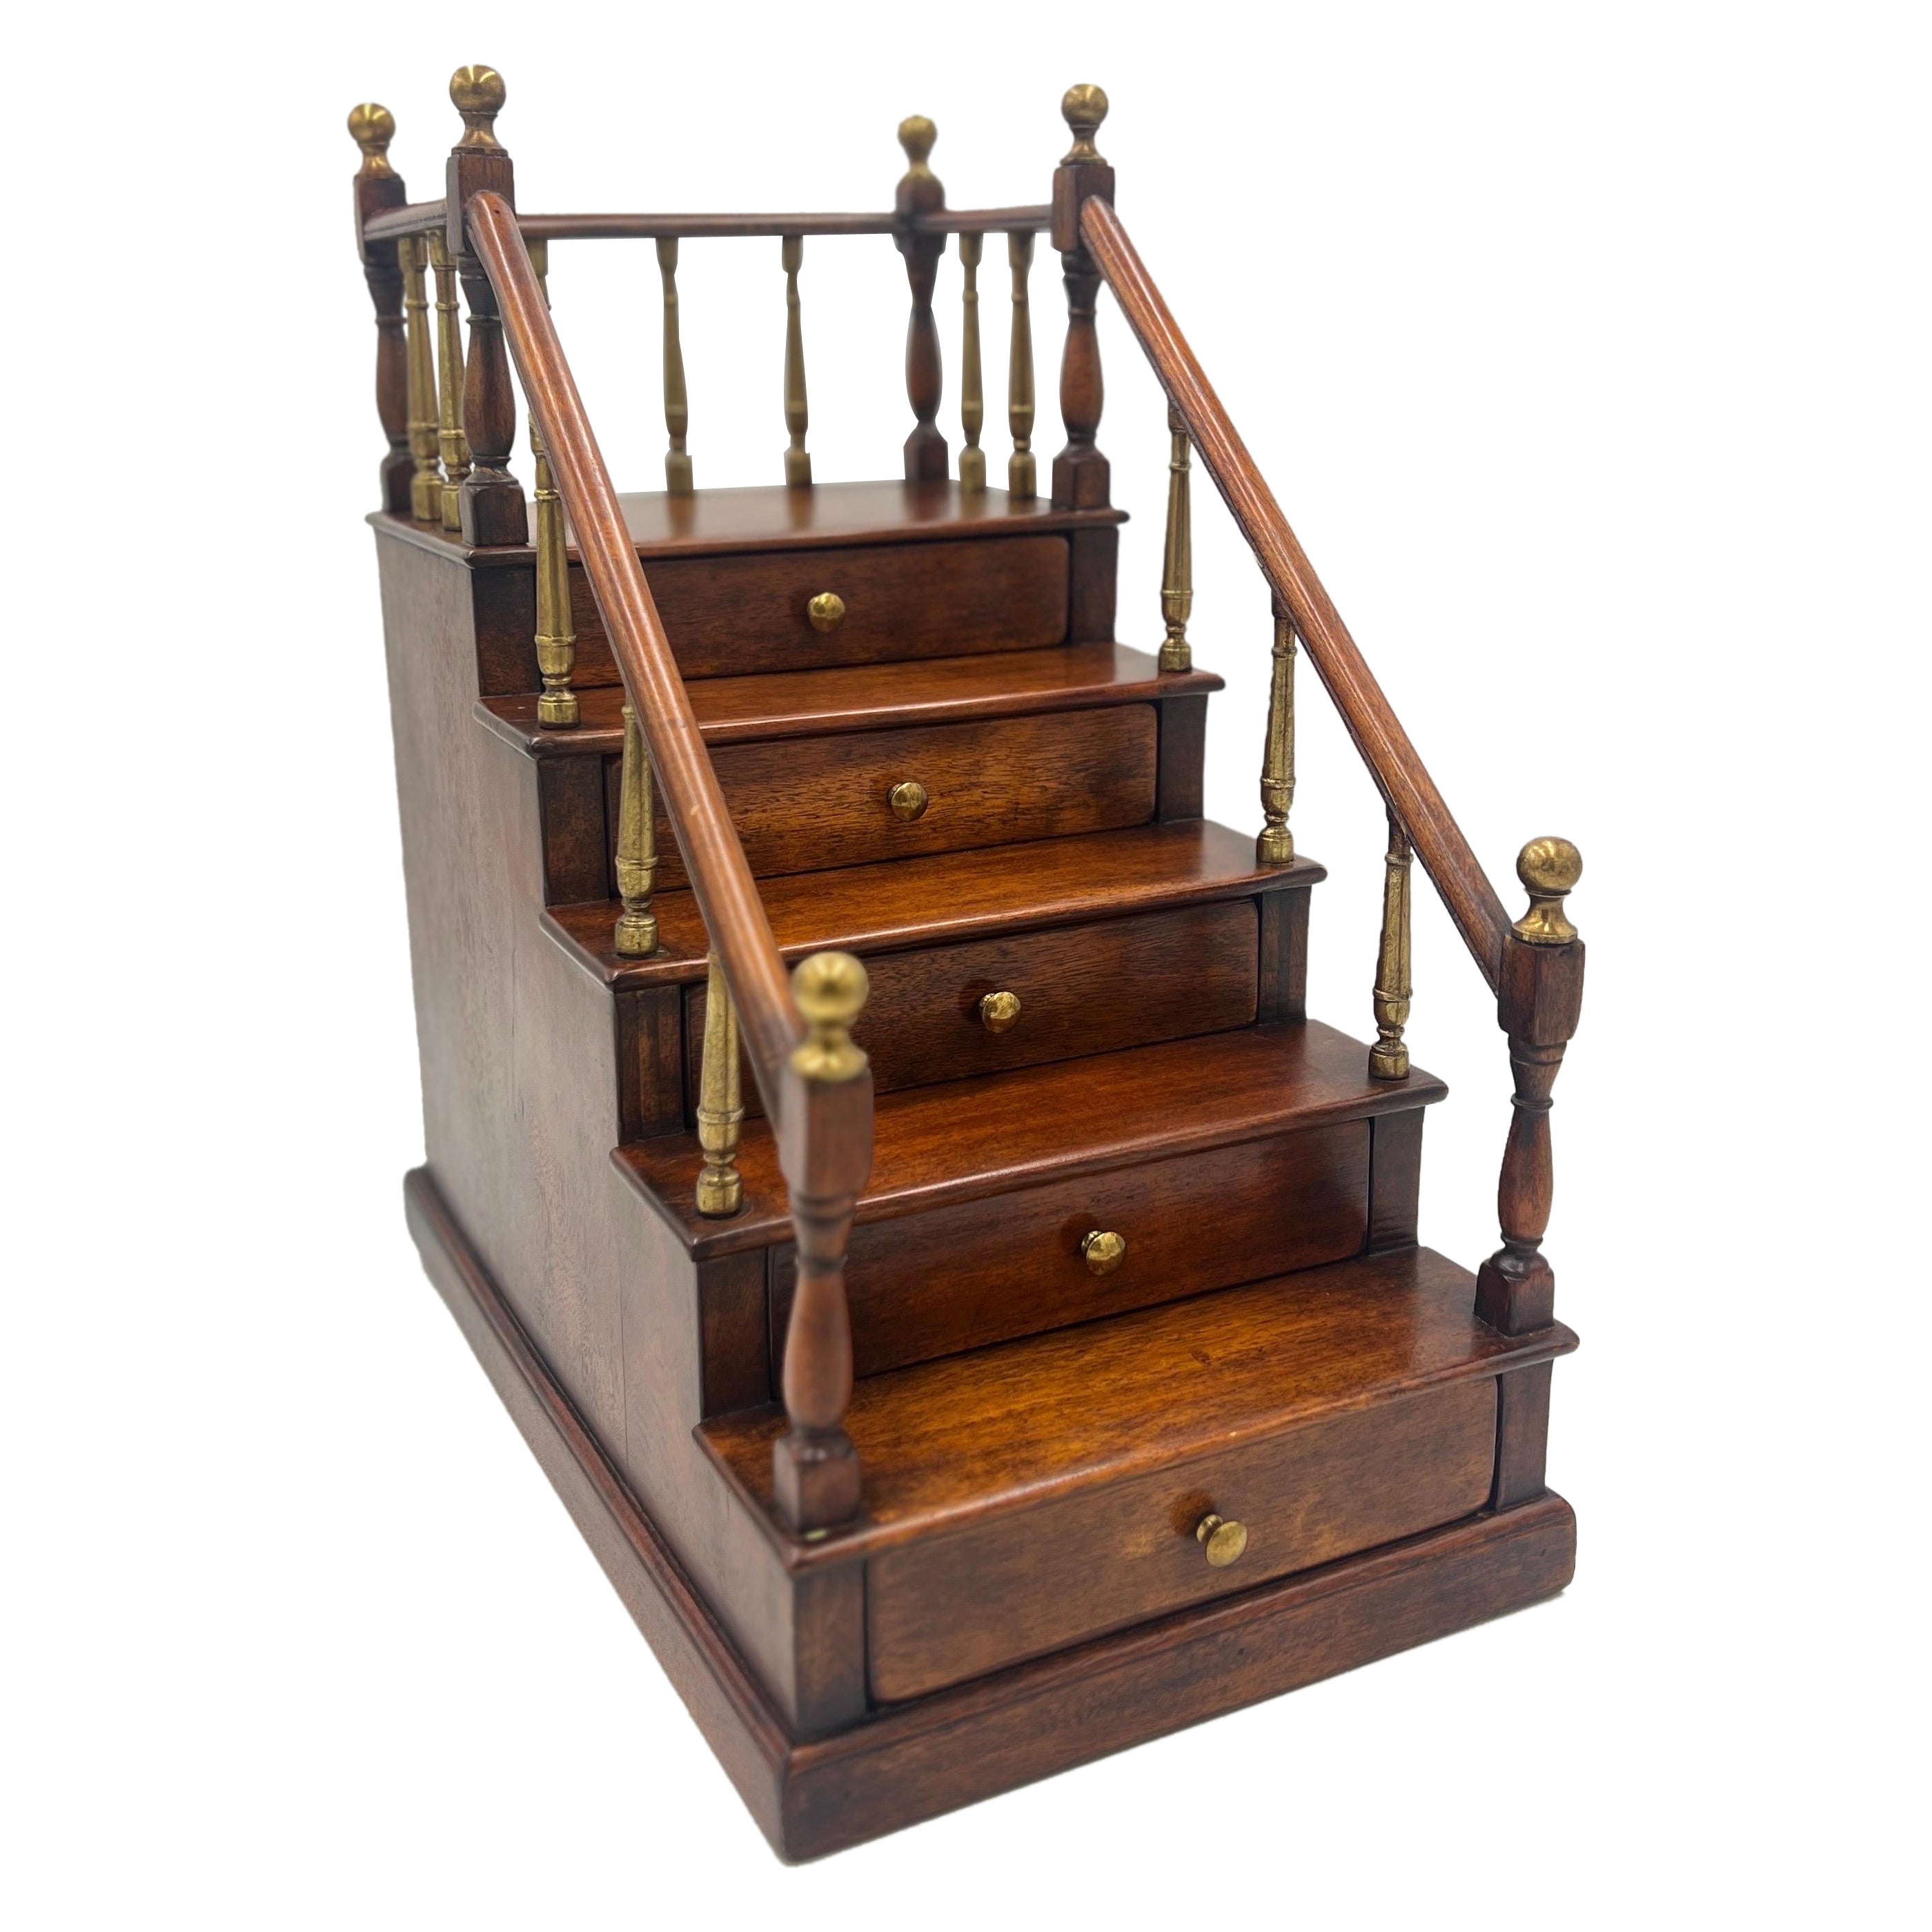 Antique Edwardian Mahogany Staircase Model with Brass Finial Newel Posts For Sale